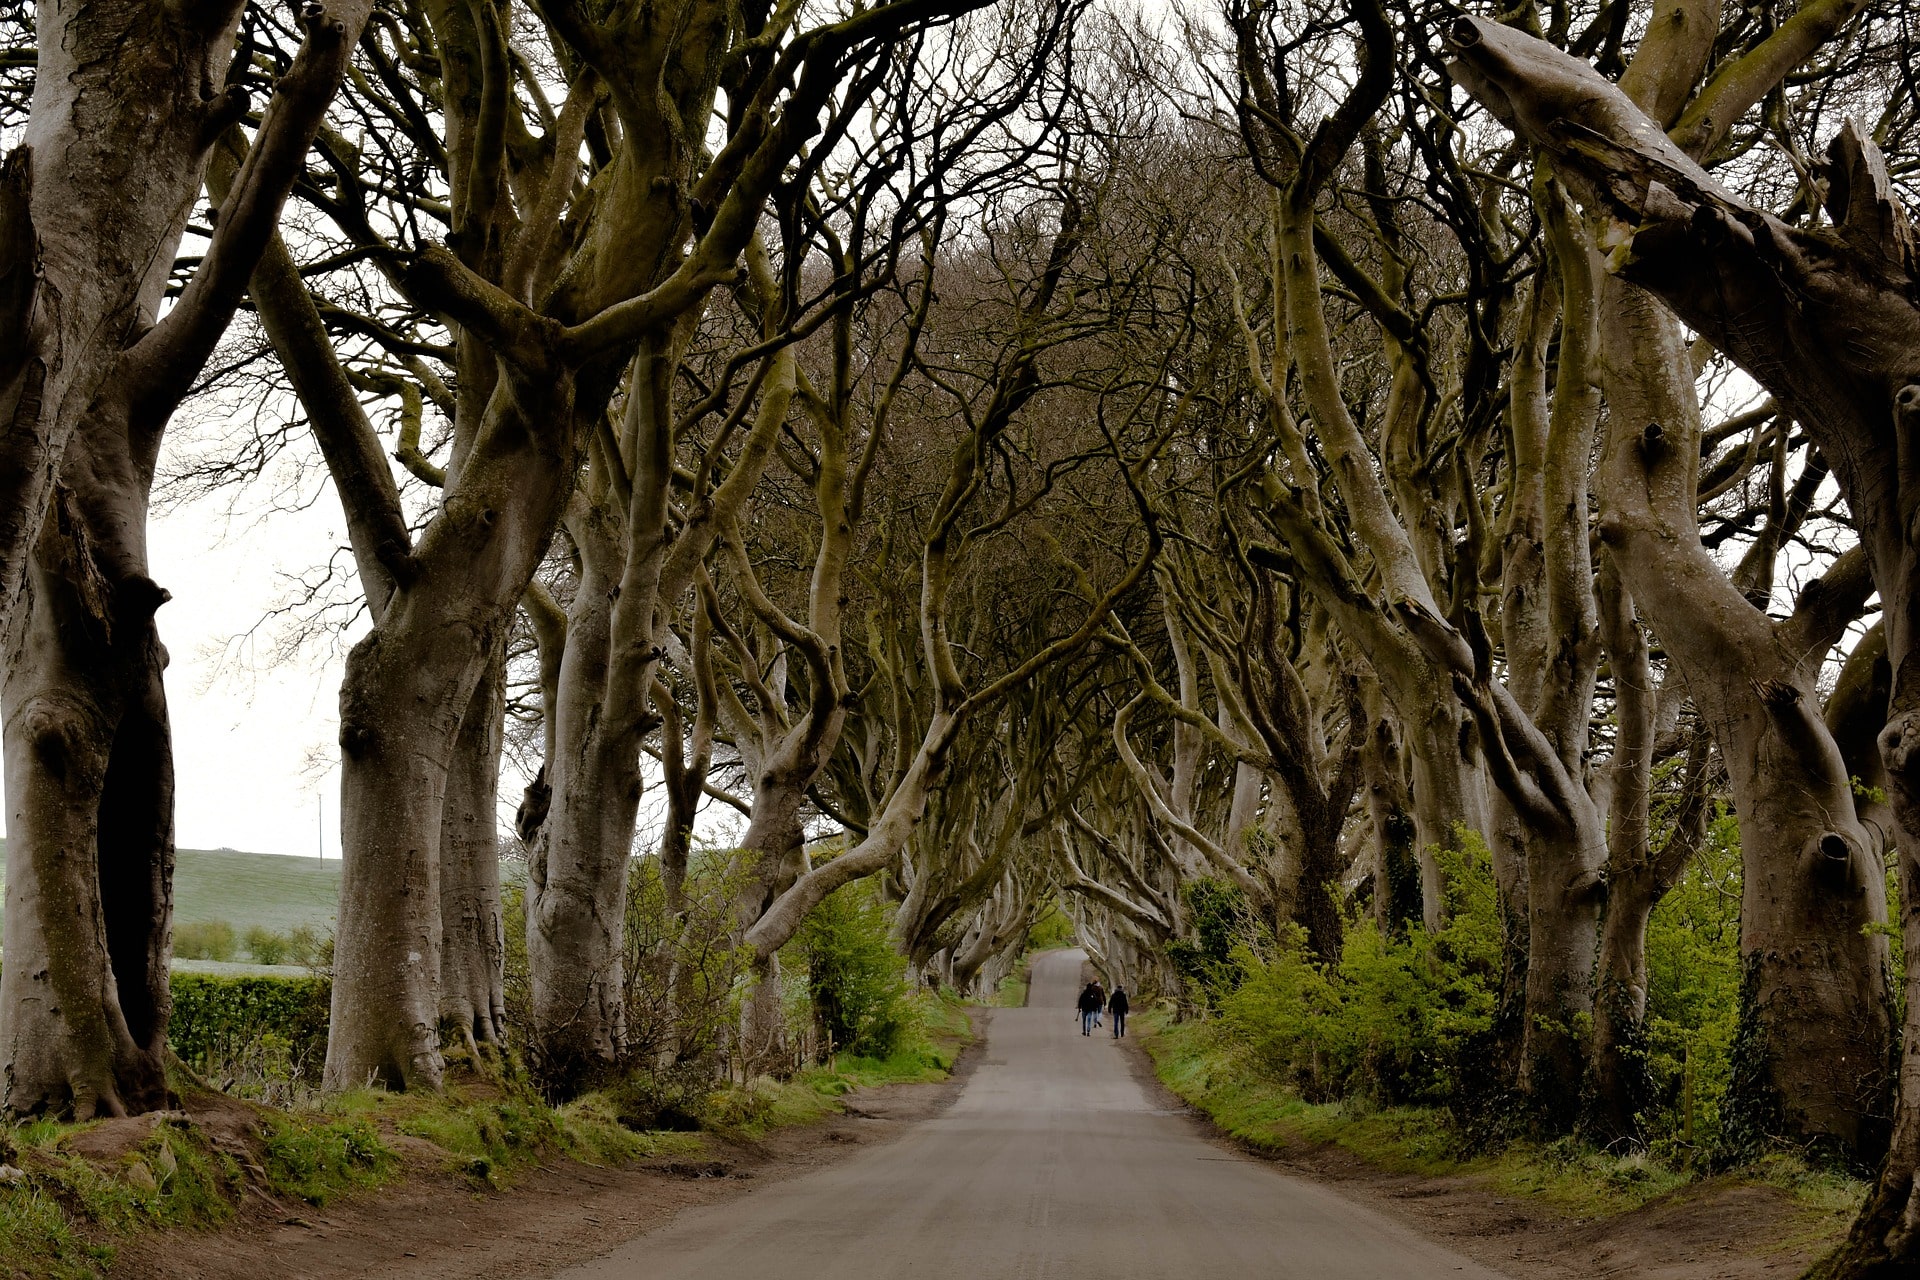 Wandering the Dark Hedges is one of the coolest things to do in Northern Ireland